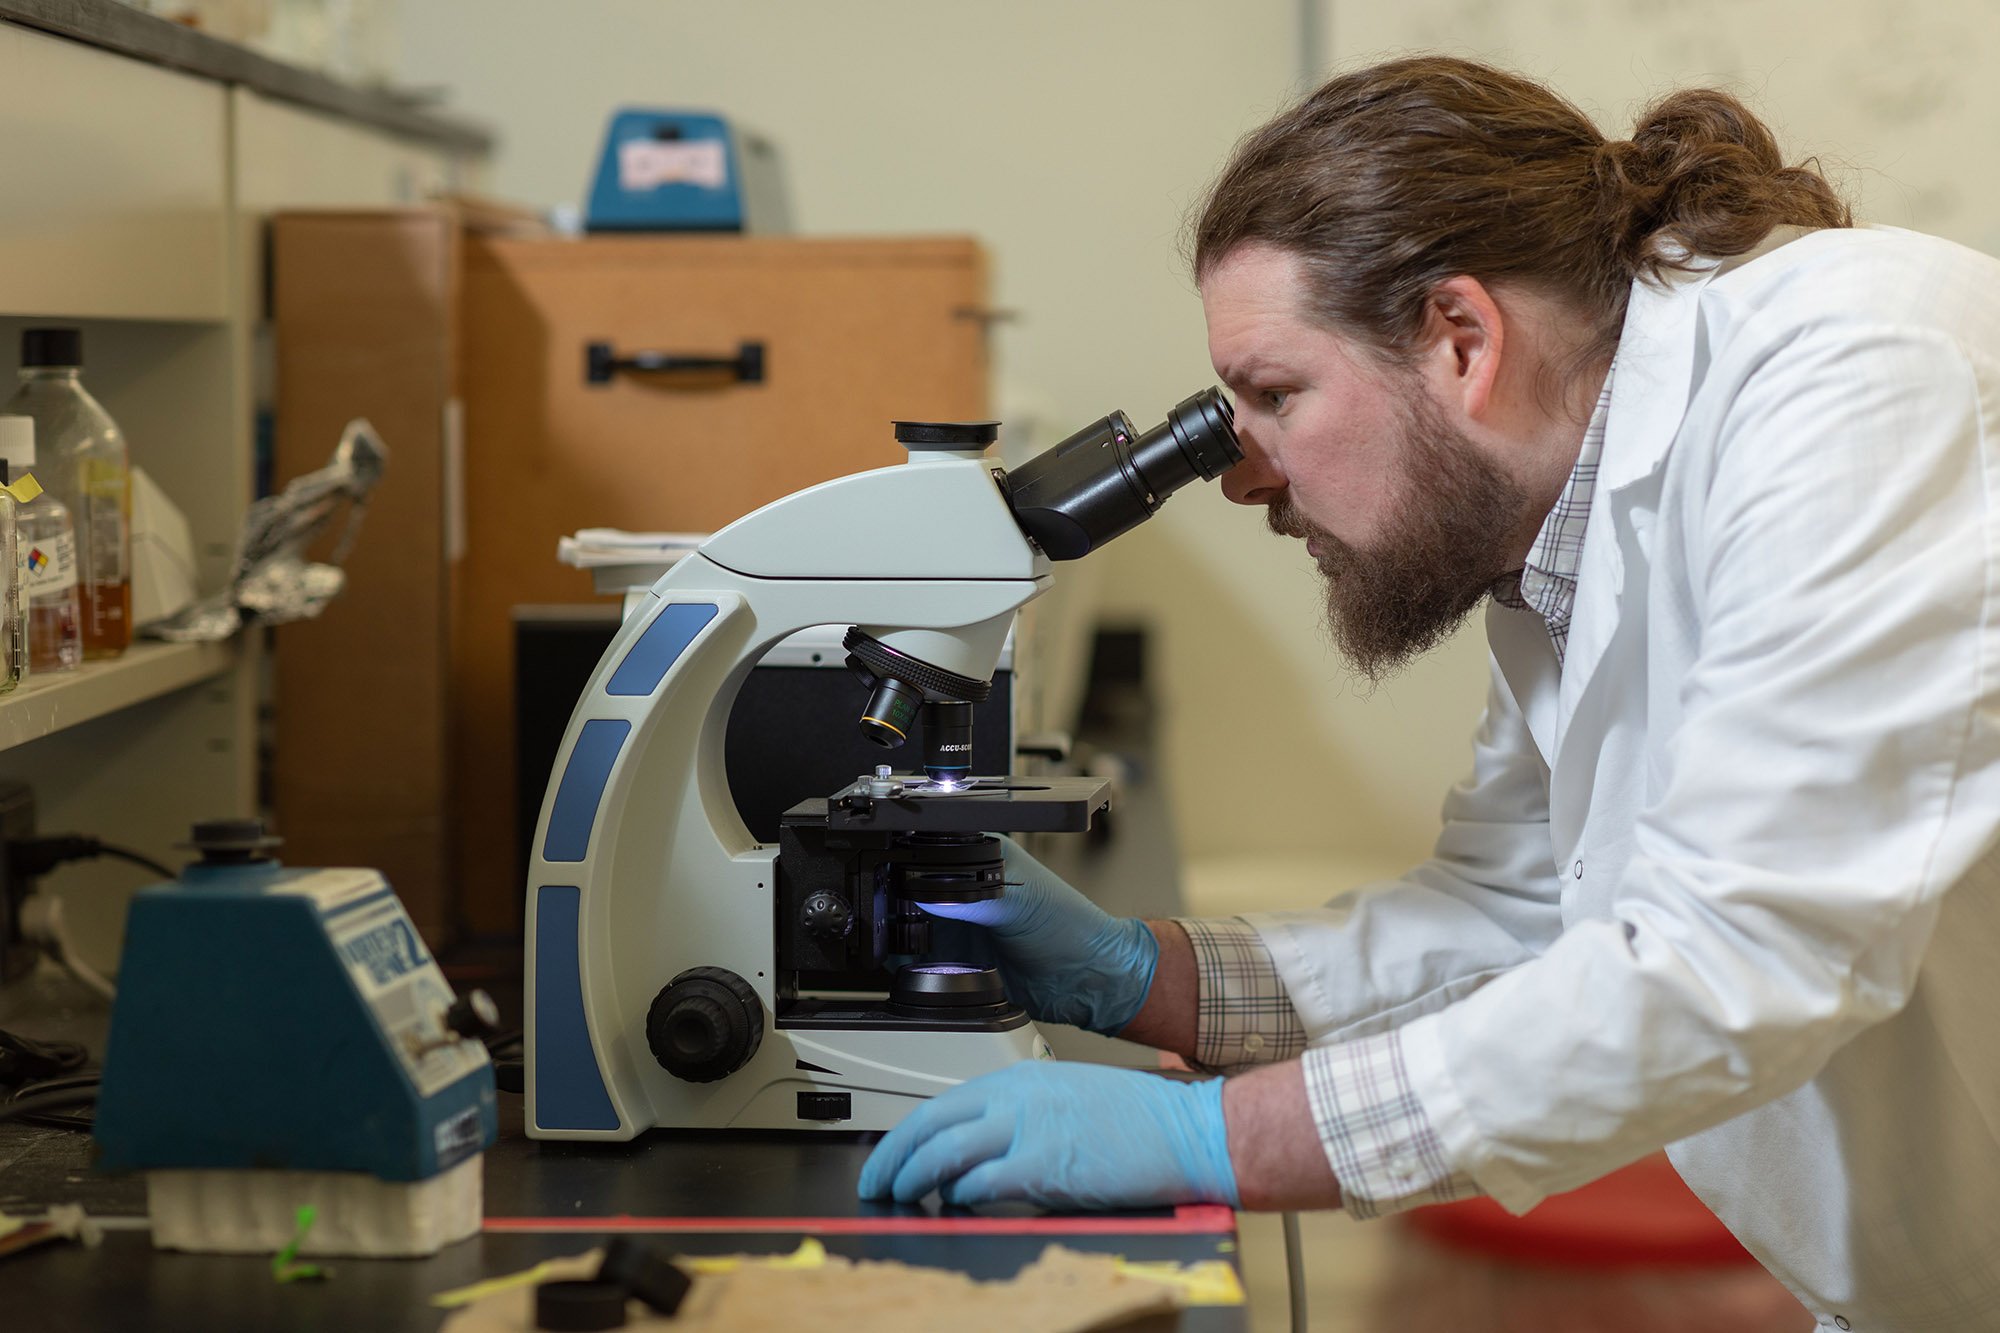 PhD student Michael Dolan looks into a microscope in the lab of Mike Fasullo